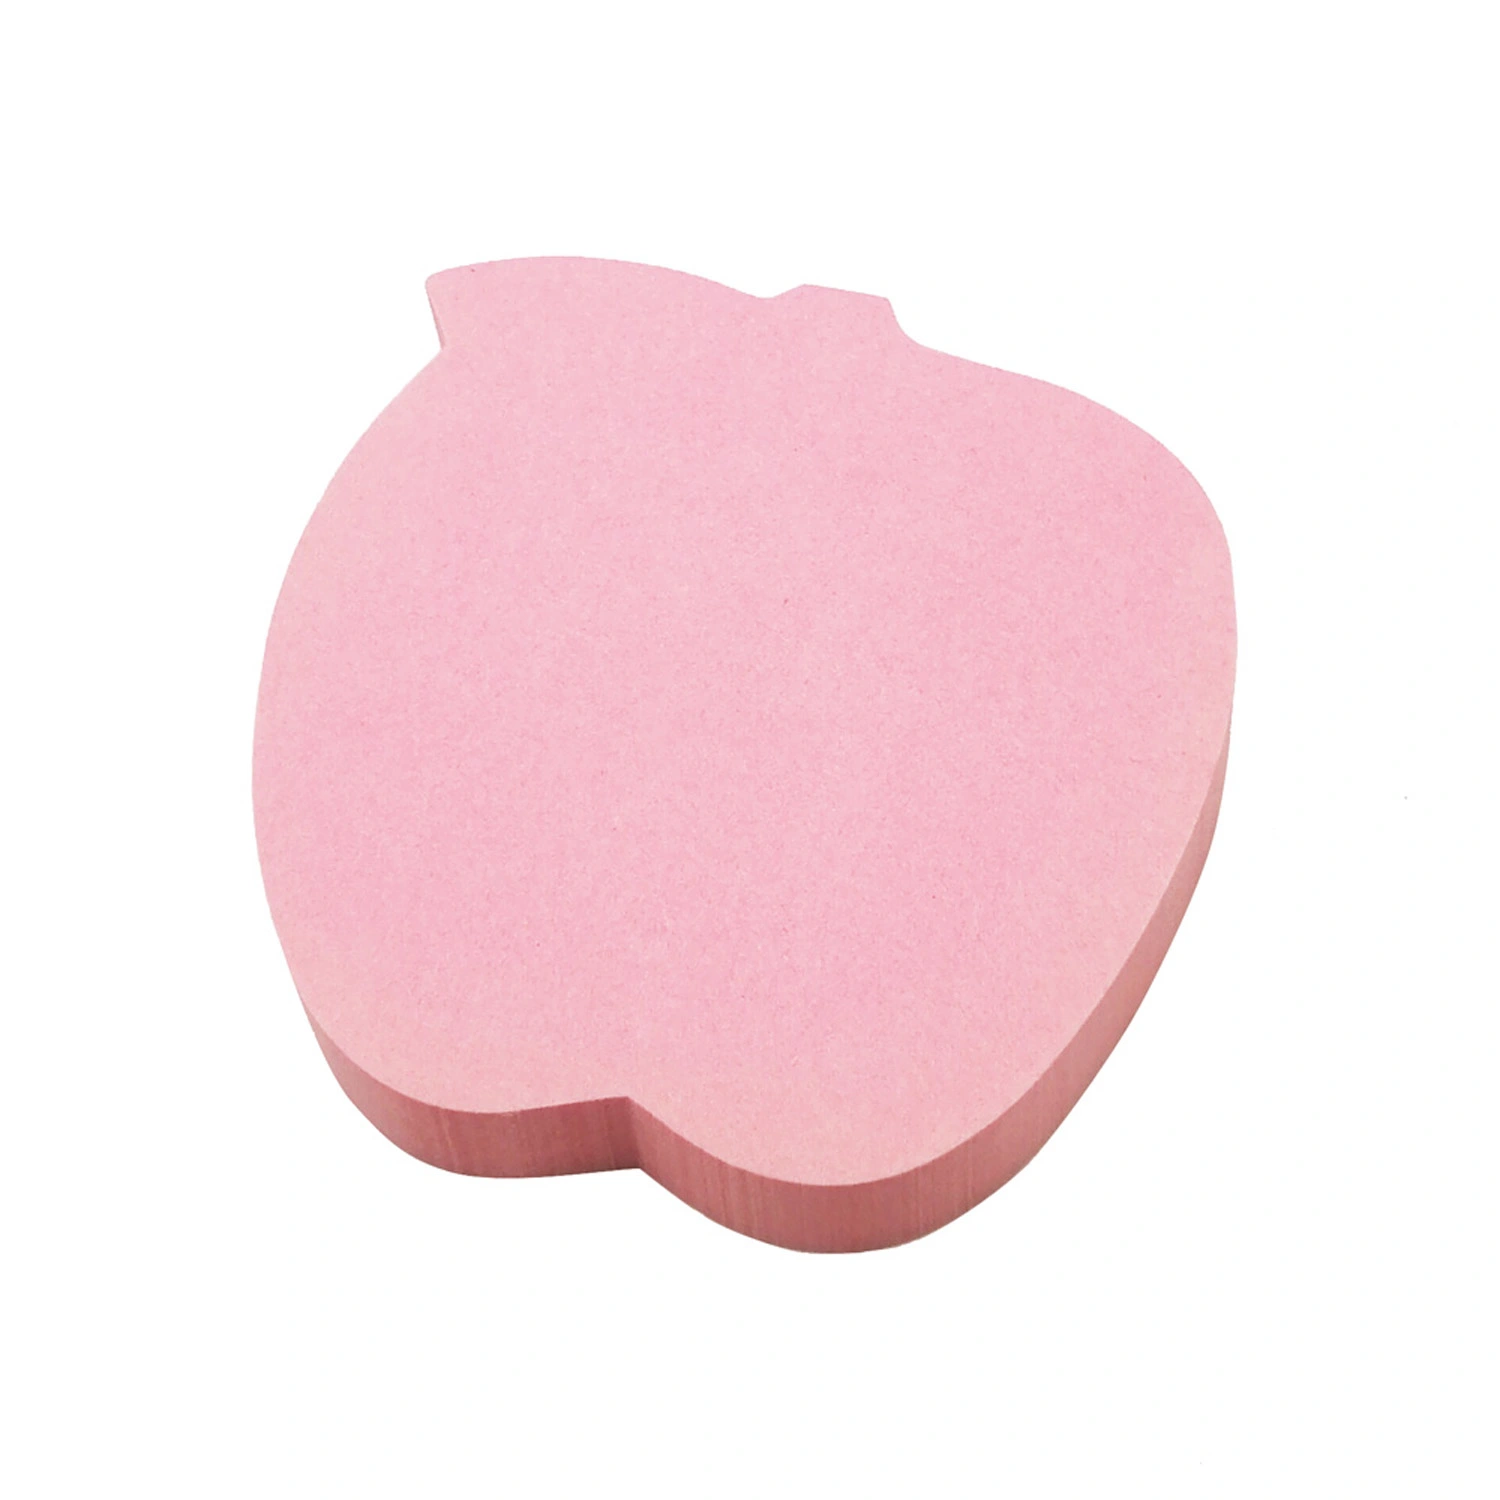 Wholesale price apple shaped custom cute sticky notes pad